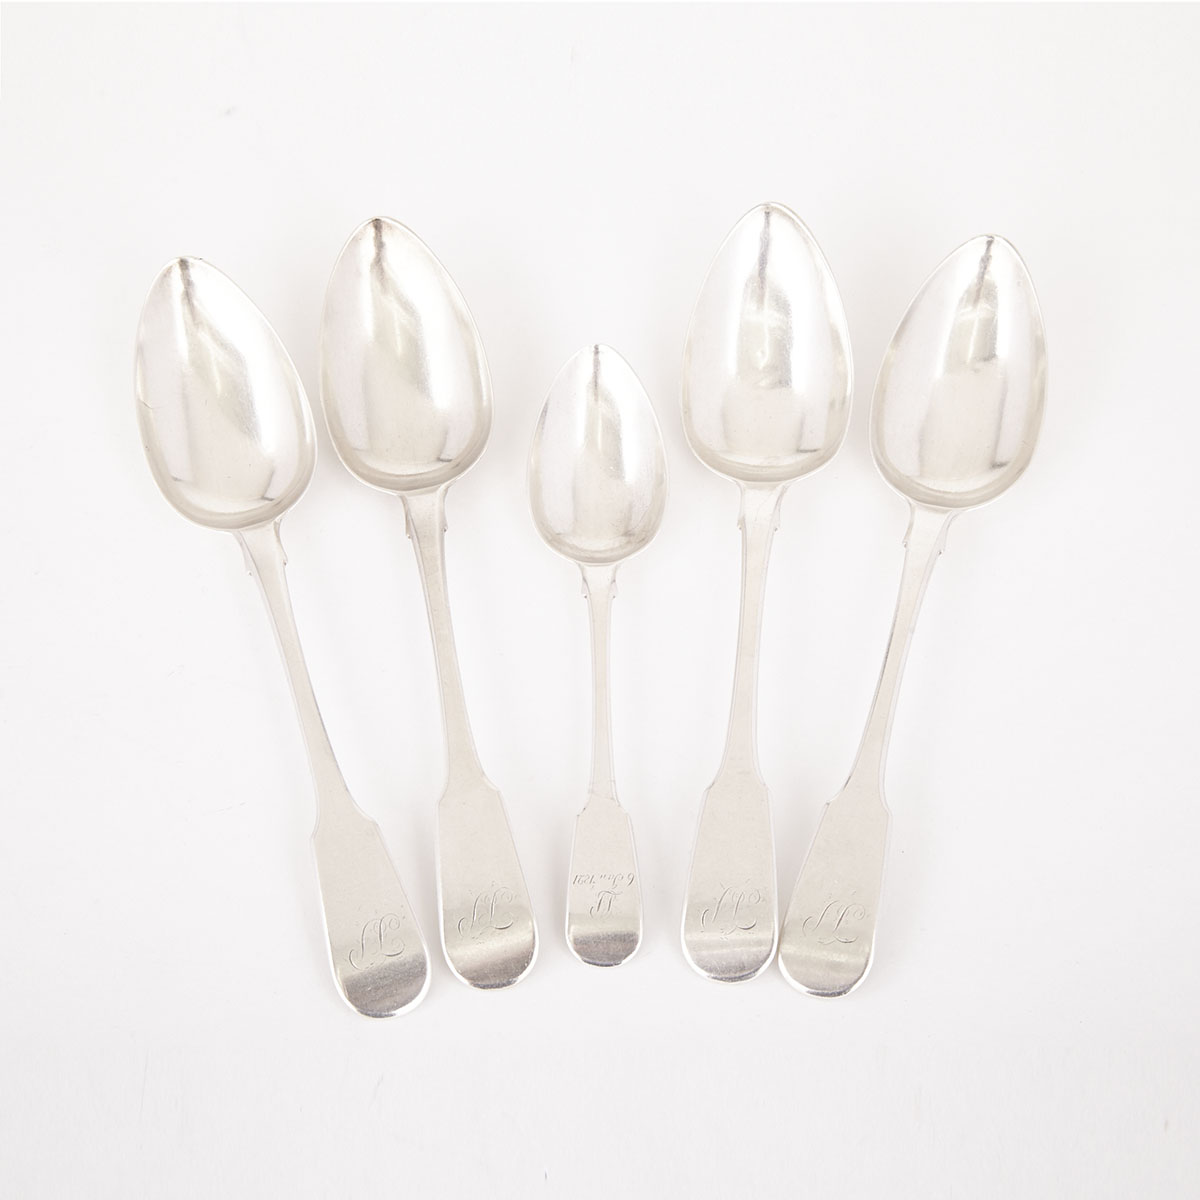 Four Canadian Silver Fiddle Pattern Table Spoons and a Dessert Spoon, Joseph Sasseville, Quebec City, Que., c.1820